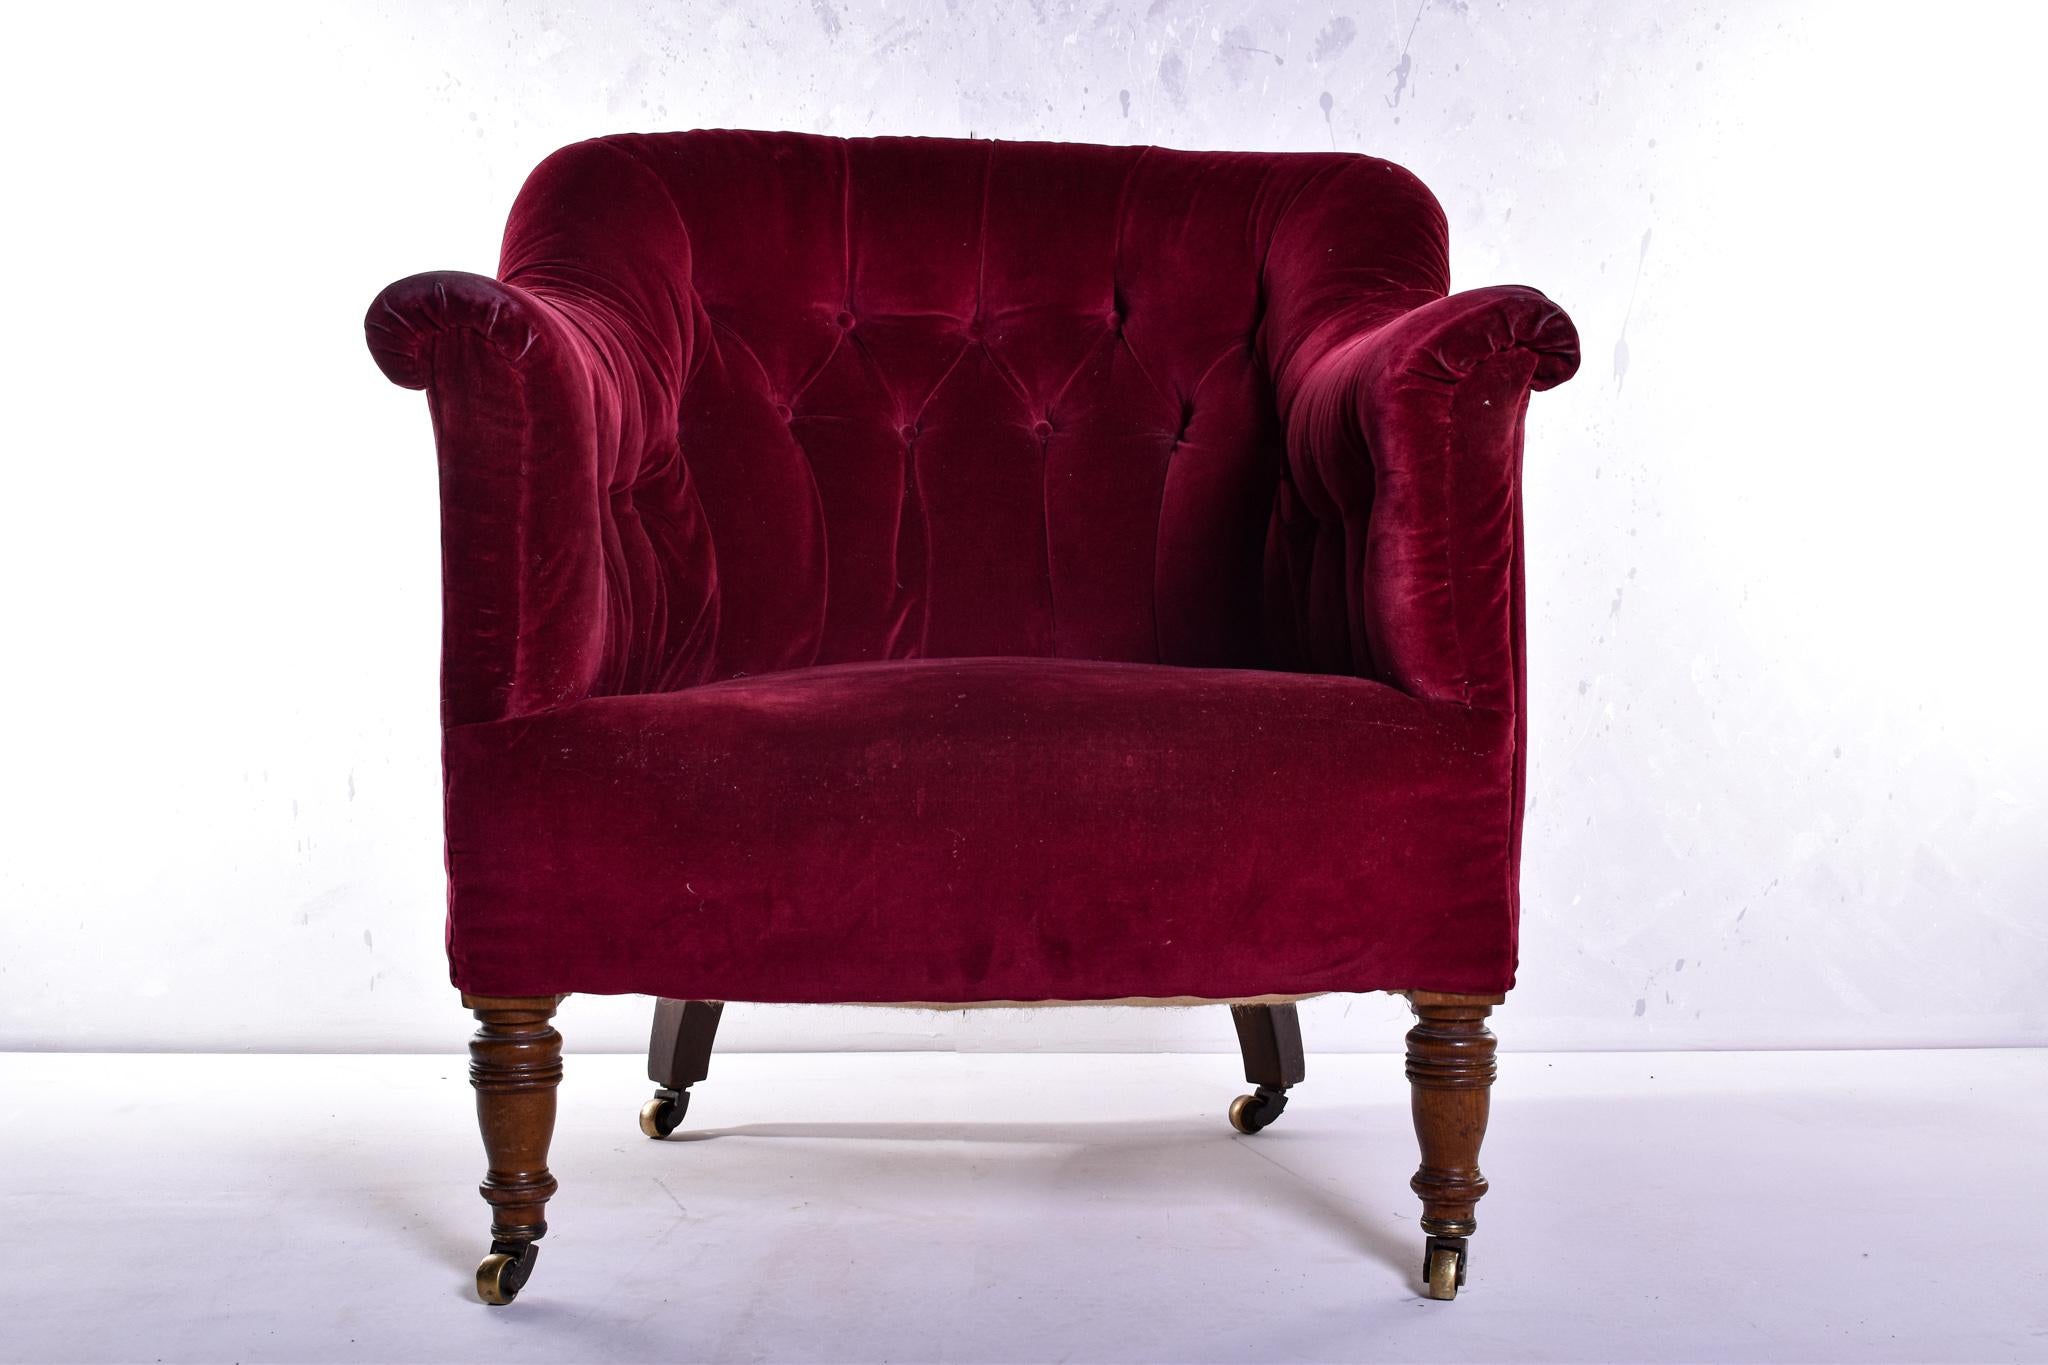 A true country house beauty with fantastic provenance, this classy tub chair from the master makers Howard & Sons was purchased from the Knighton Collection, Rutland House, Bakewell. Sitting proud on the signature turned front legs, terminating with